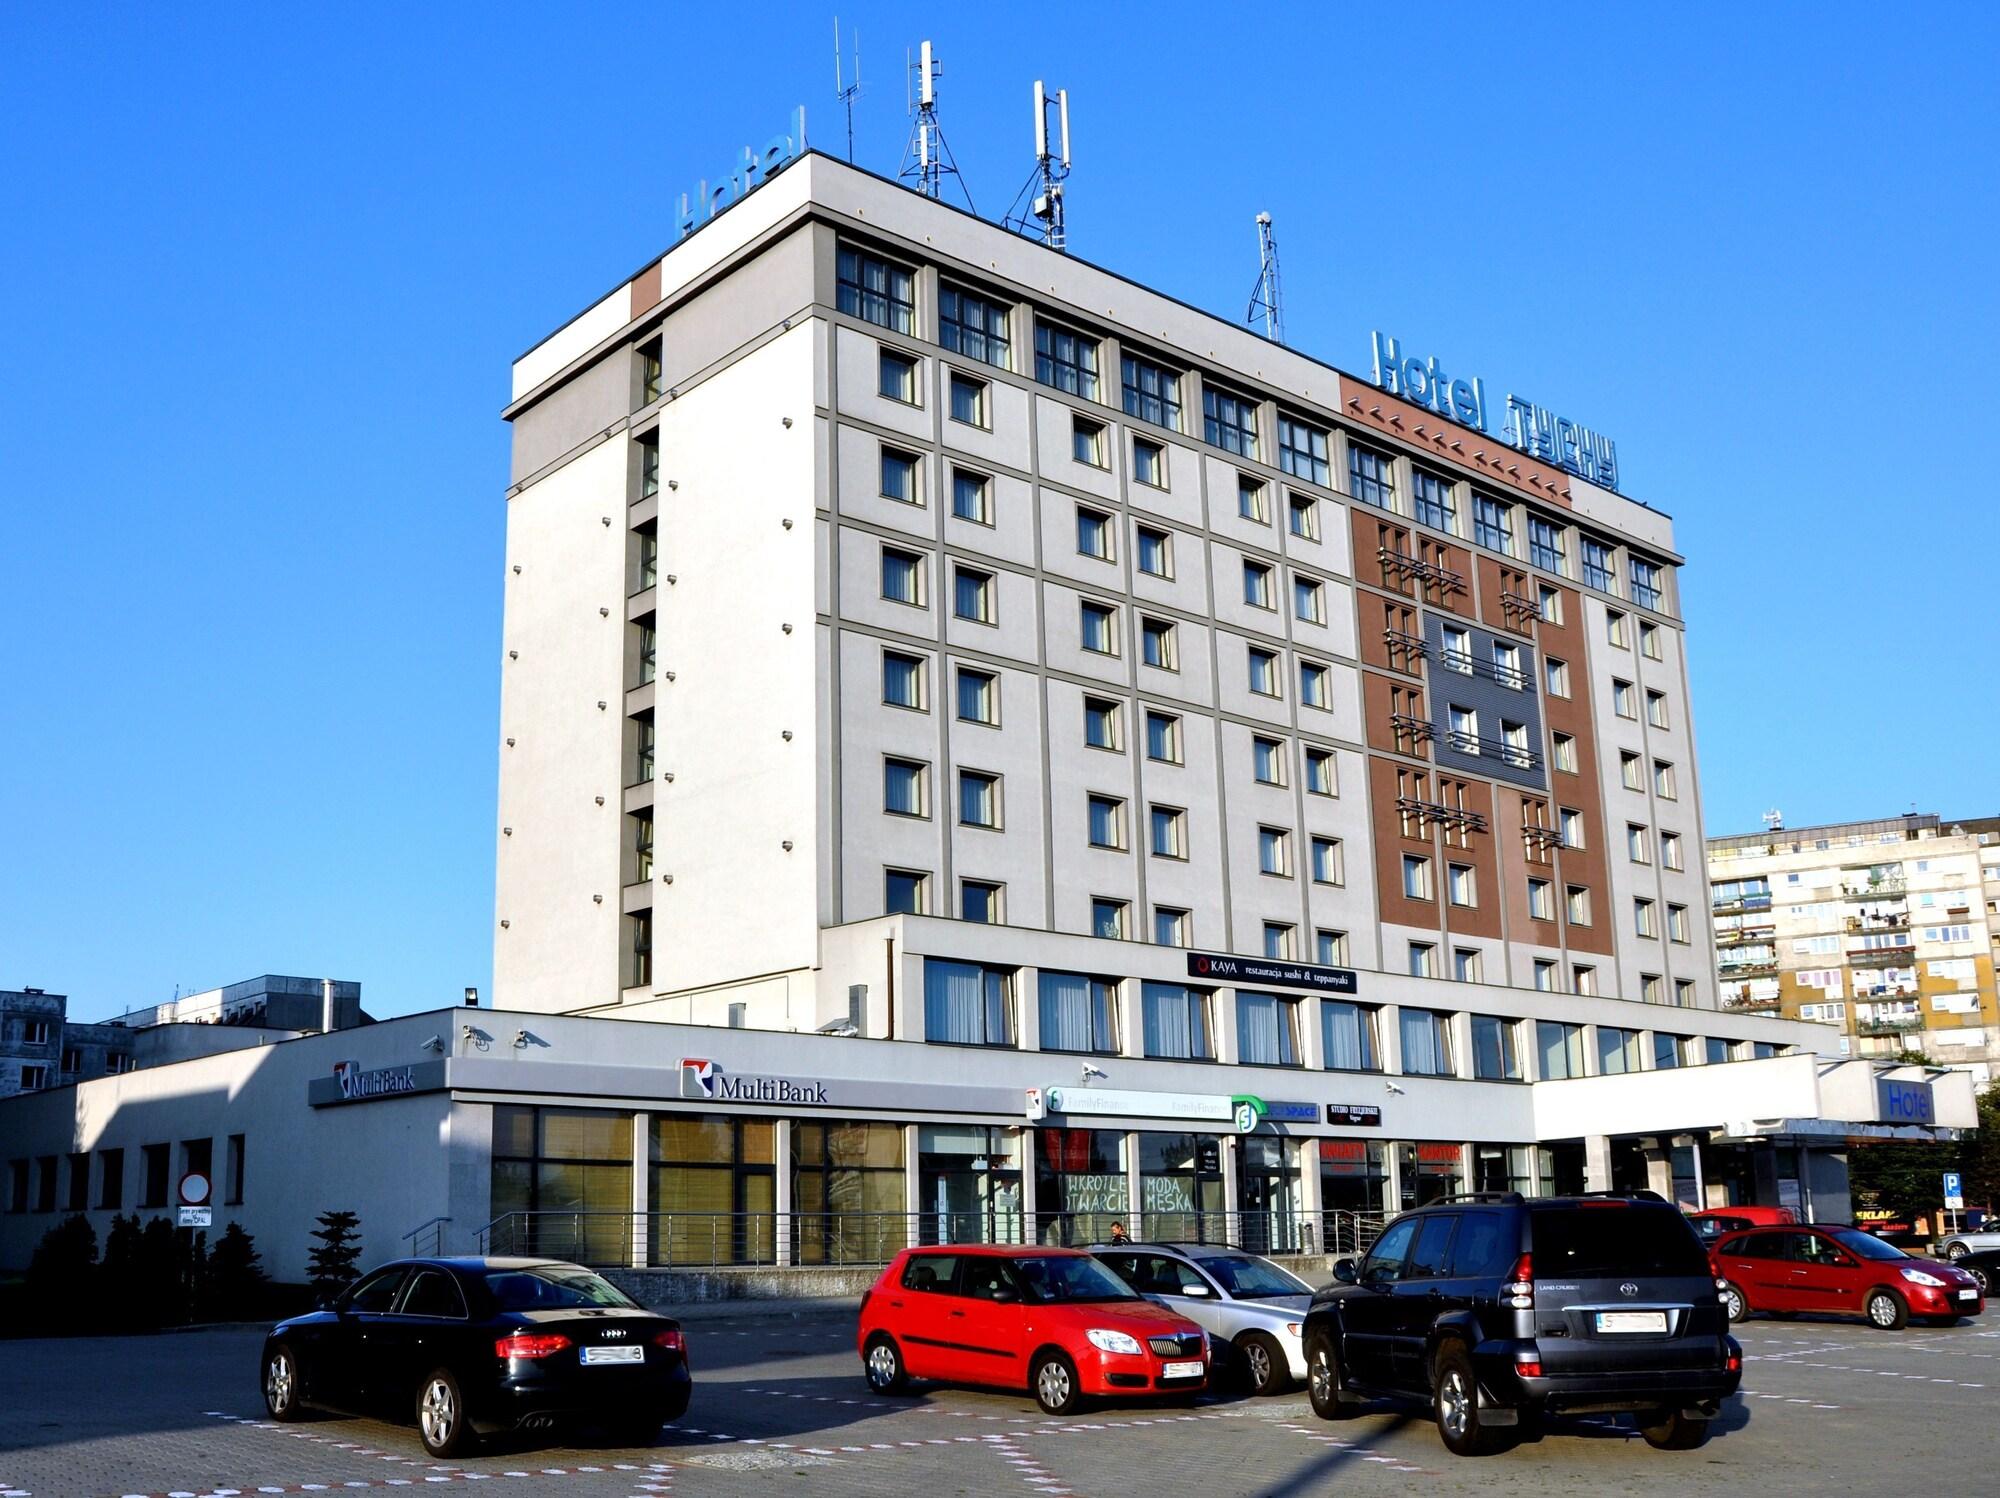 Hotel Tychy image